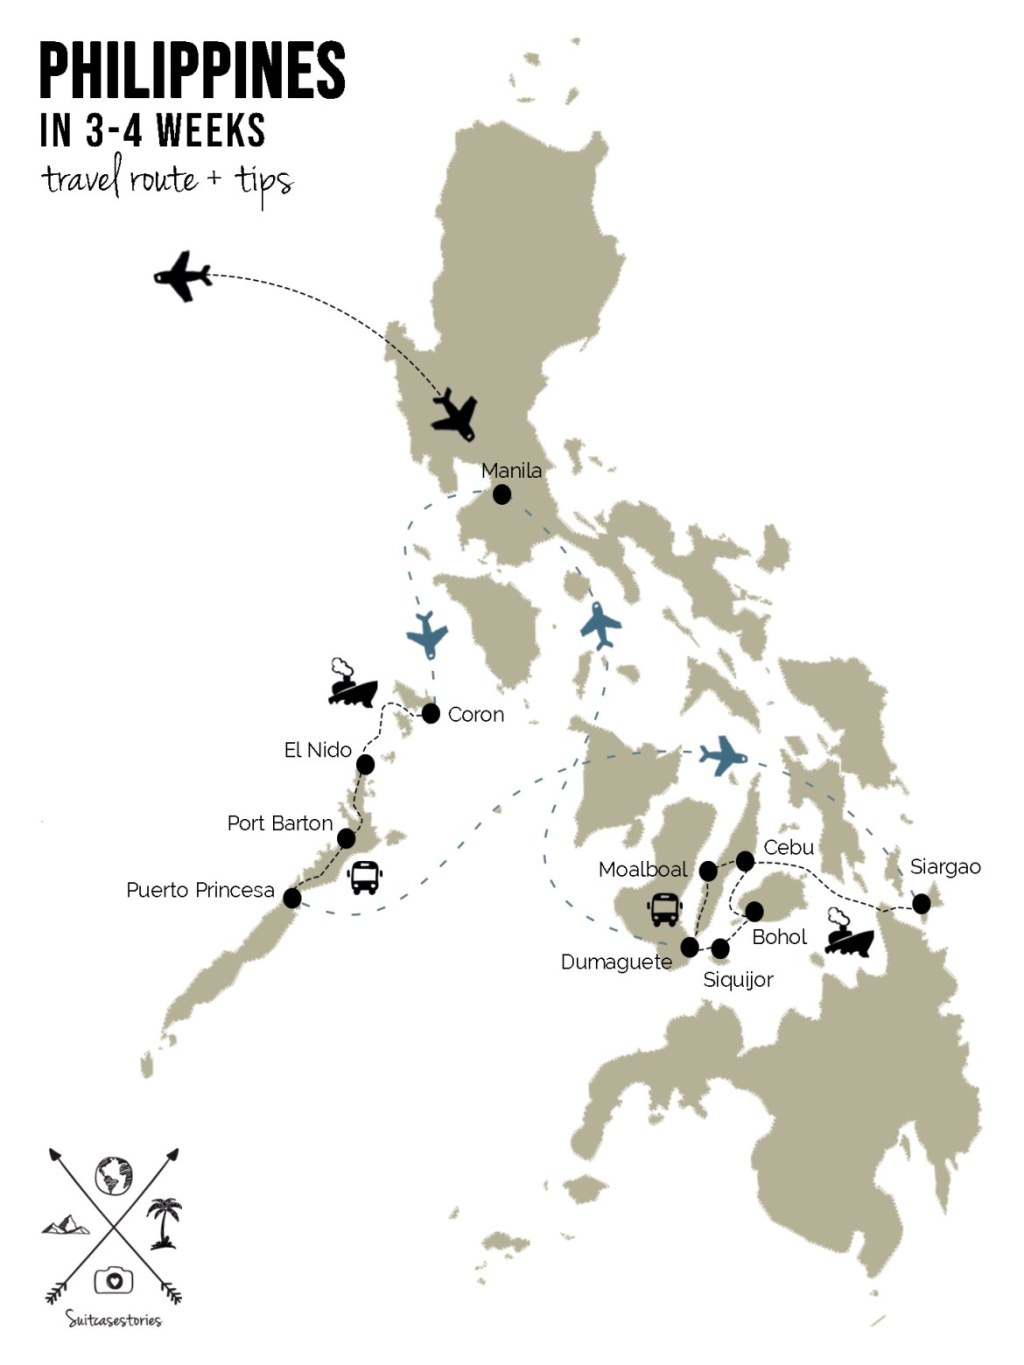 travel itinerary 4 weeks - Philippines in - weeks: travel route + tips  SUITCASESTORIES